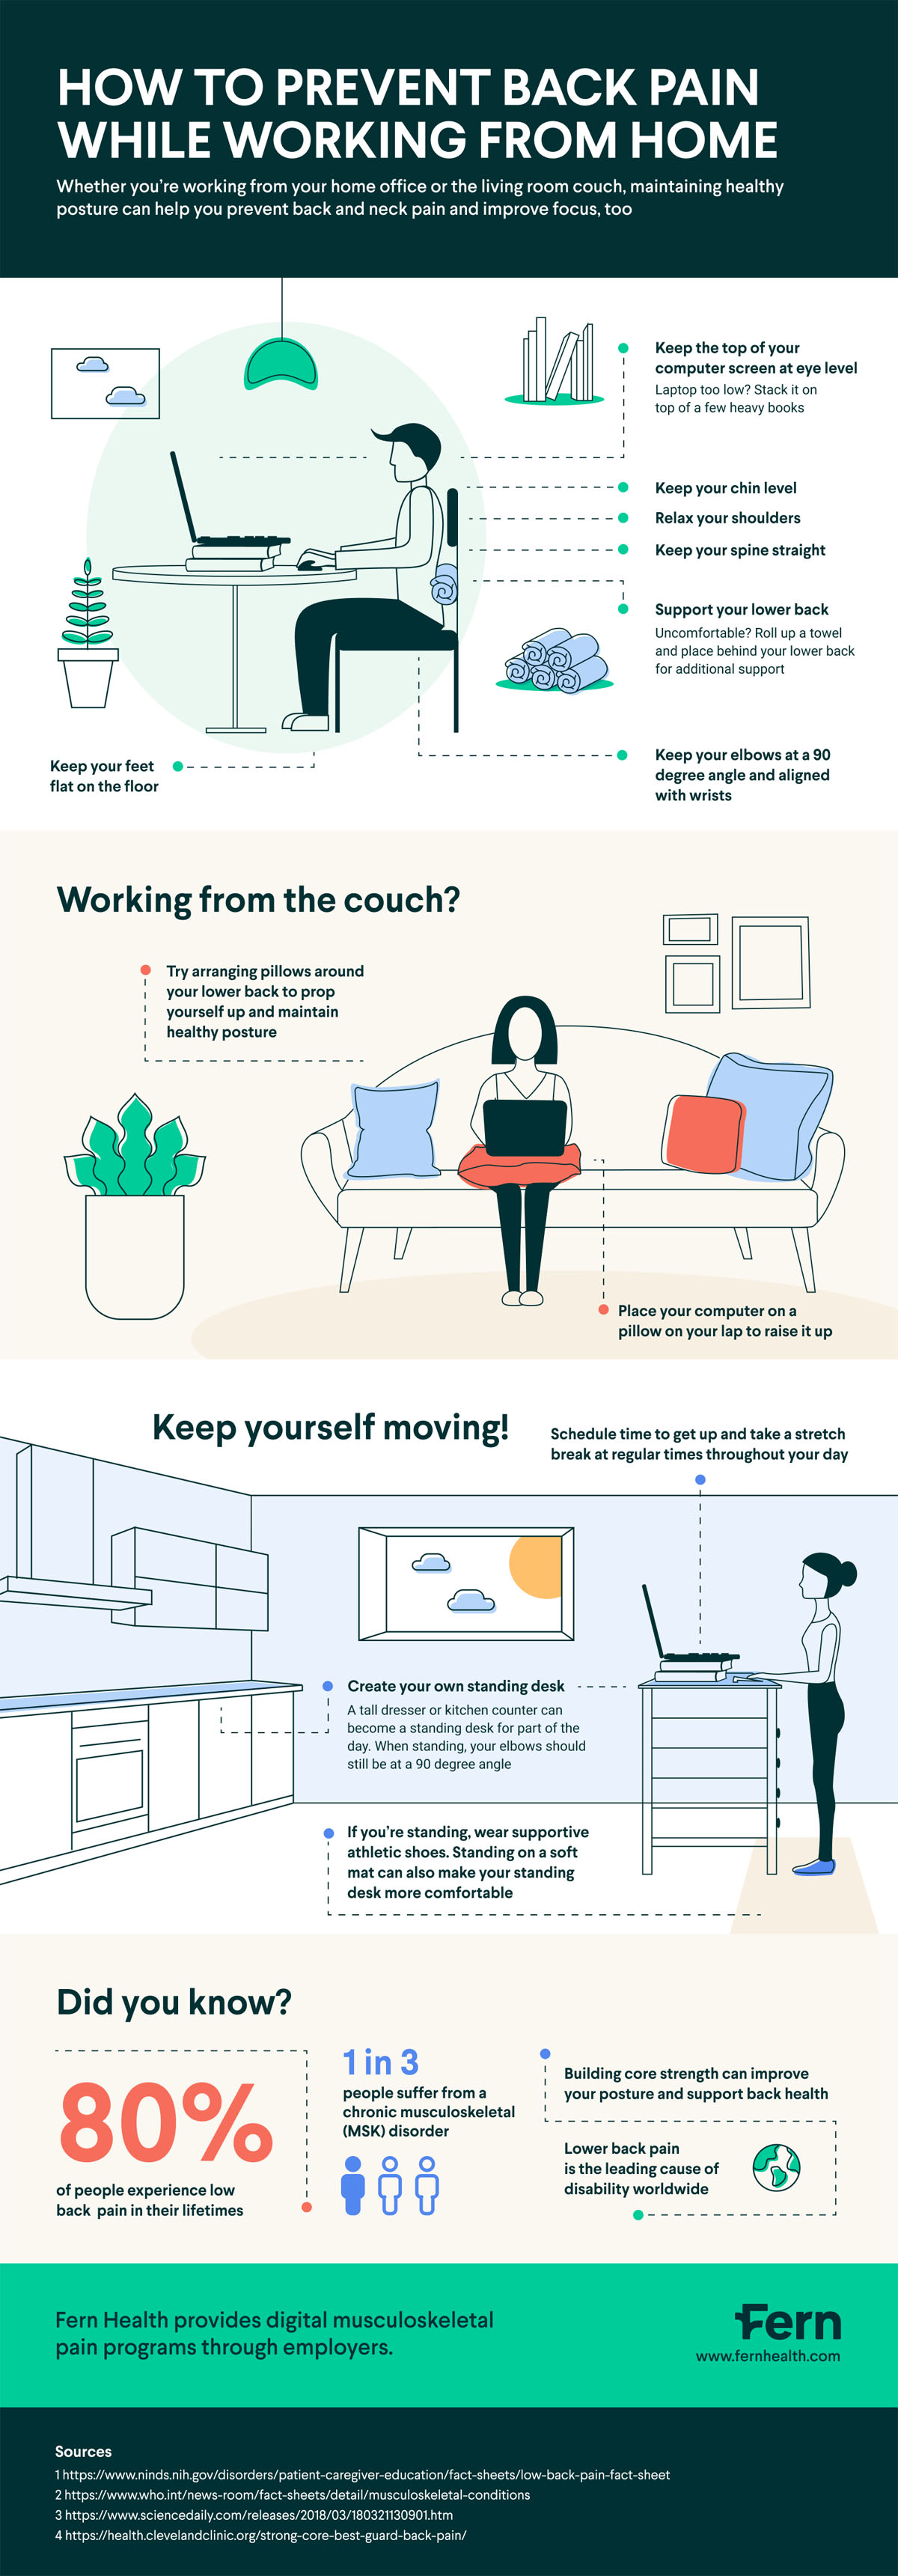 How to Prevent Back Pain While Working From Home